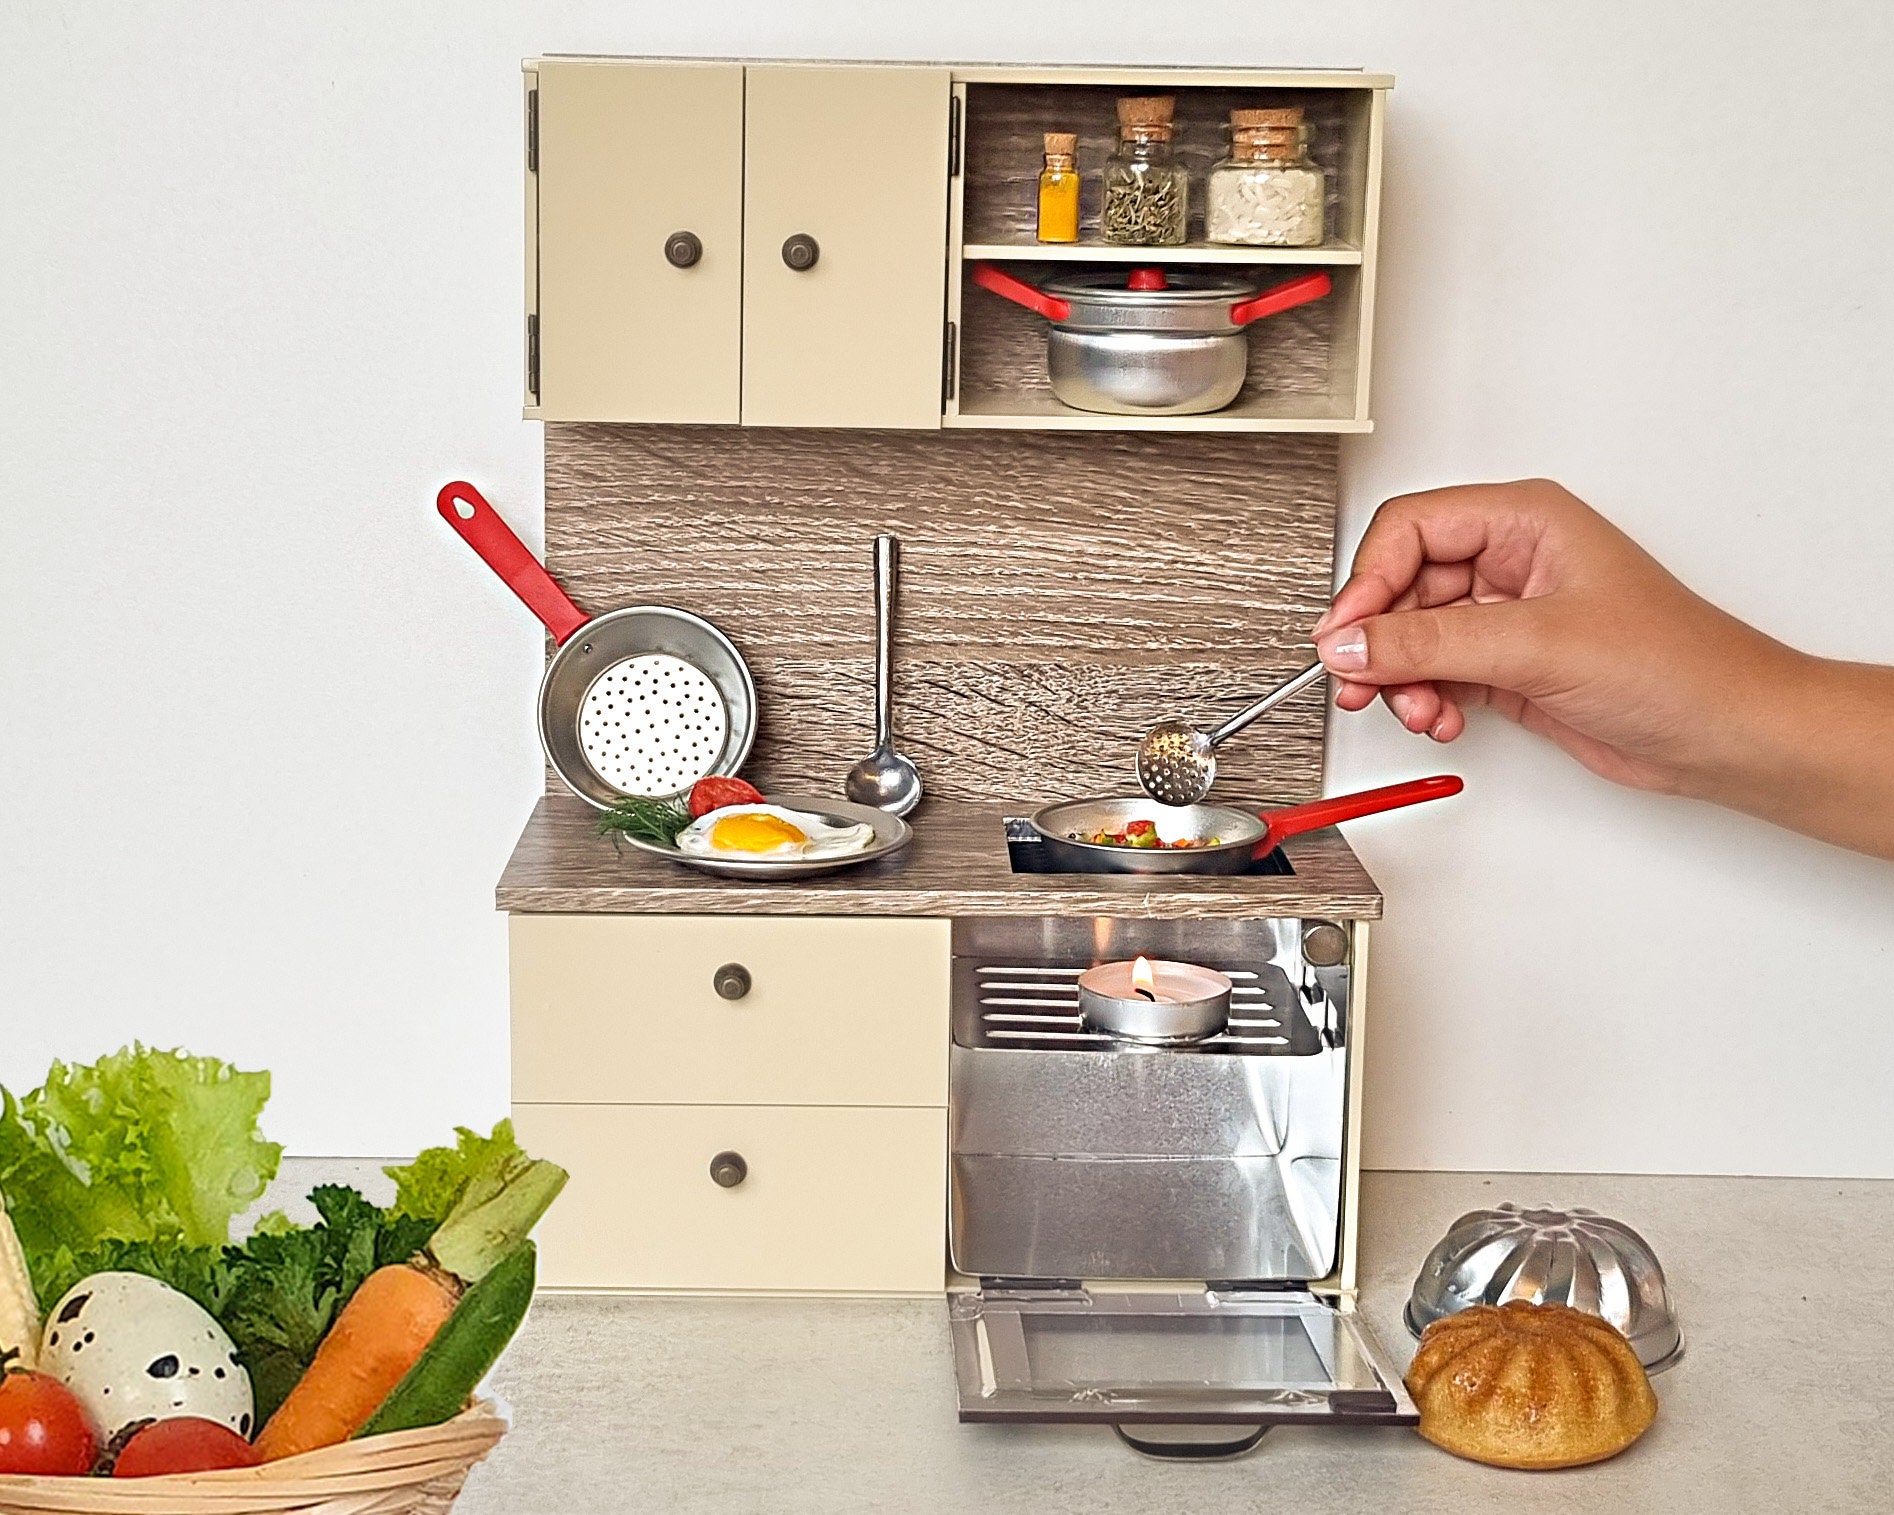 Real Food Safe Mini Food Cooking Kitchen Cooking Set Real Working Stove  Kitchen Sink 